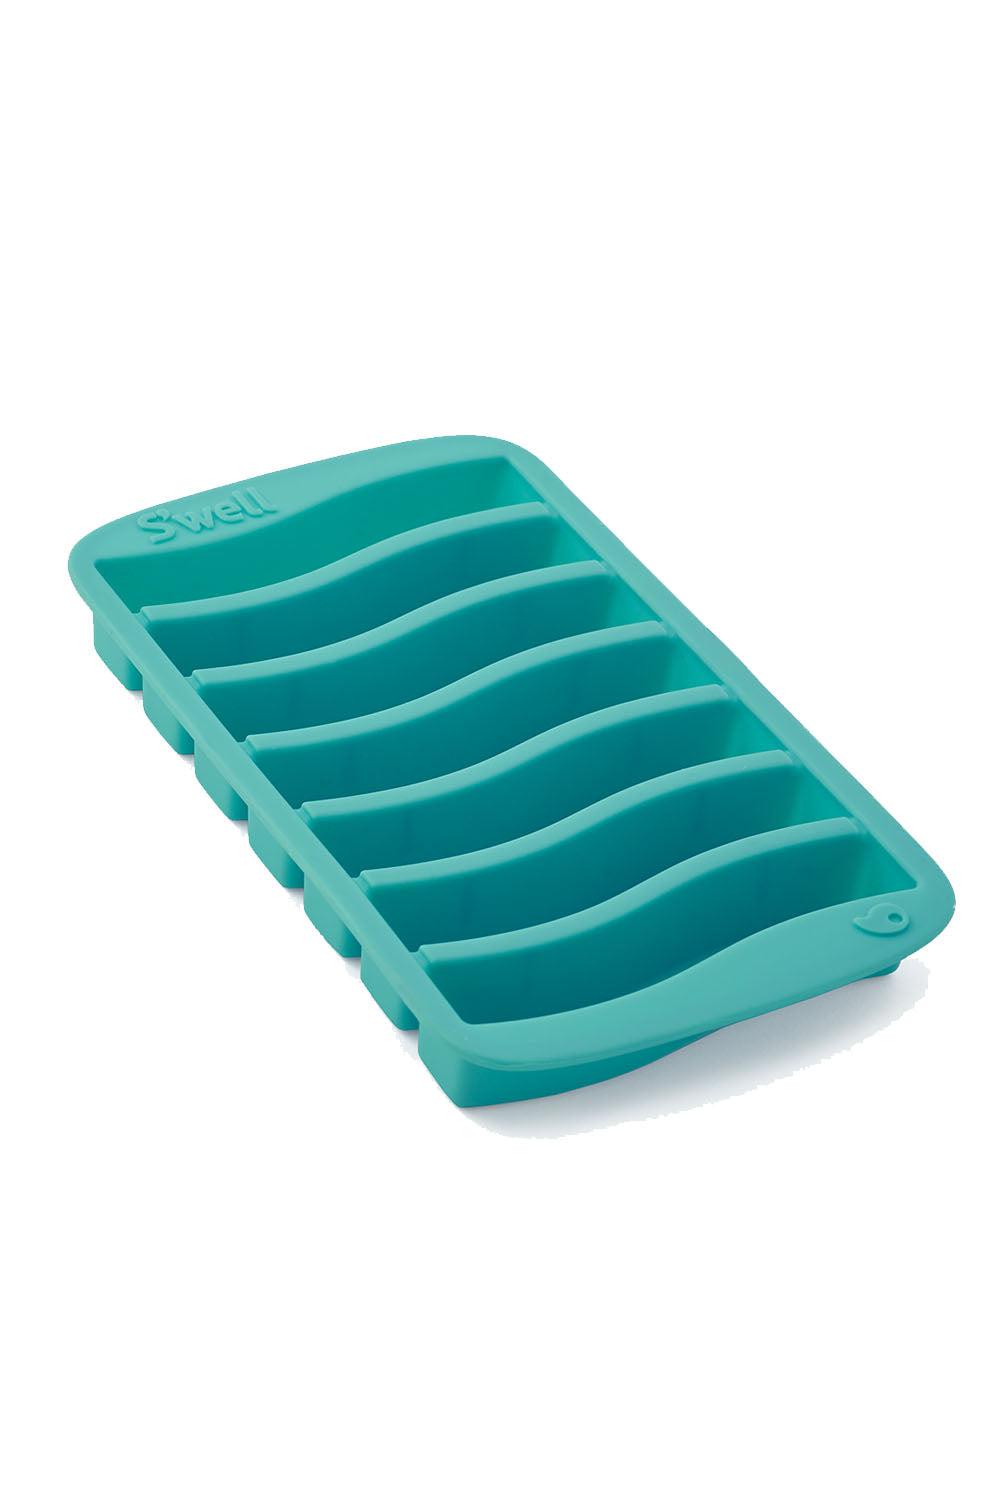 Swell-Super-Chill-Ice-Tray_aeeabd26-5498-423f-ac24-be31b8ed2620